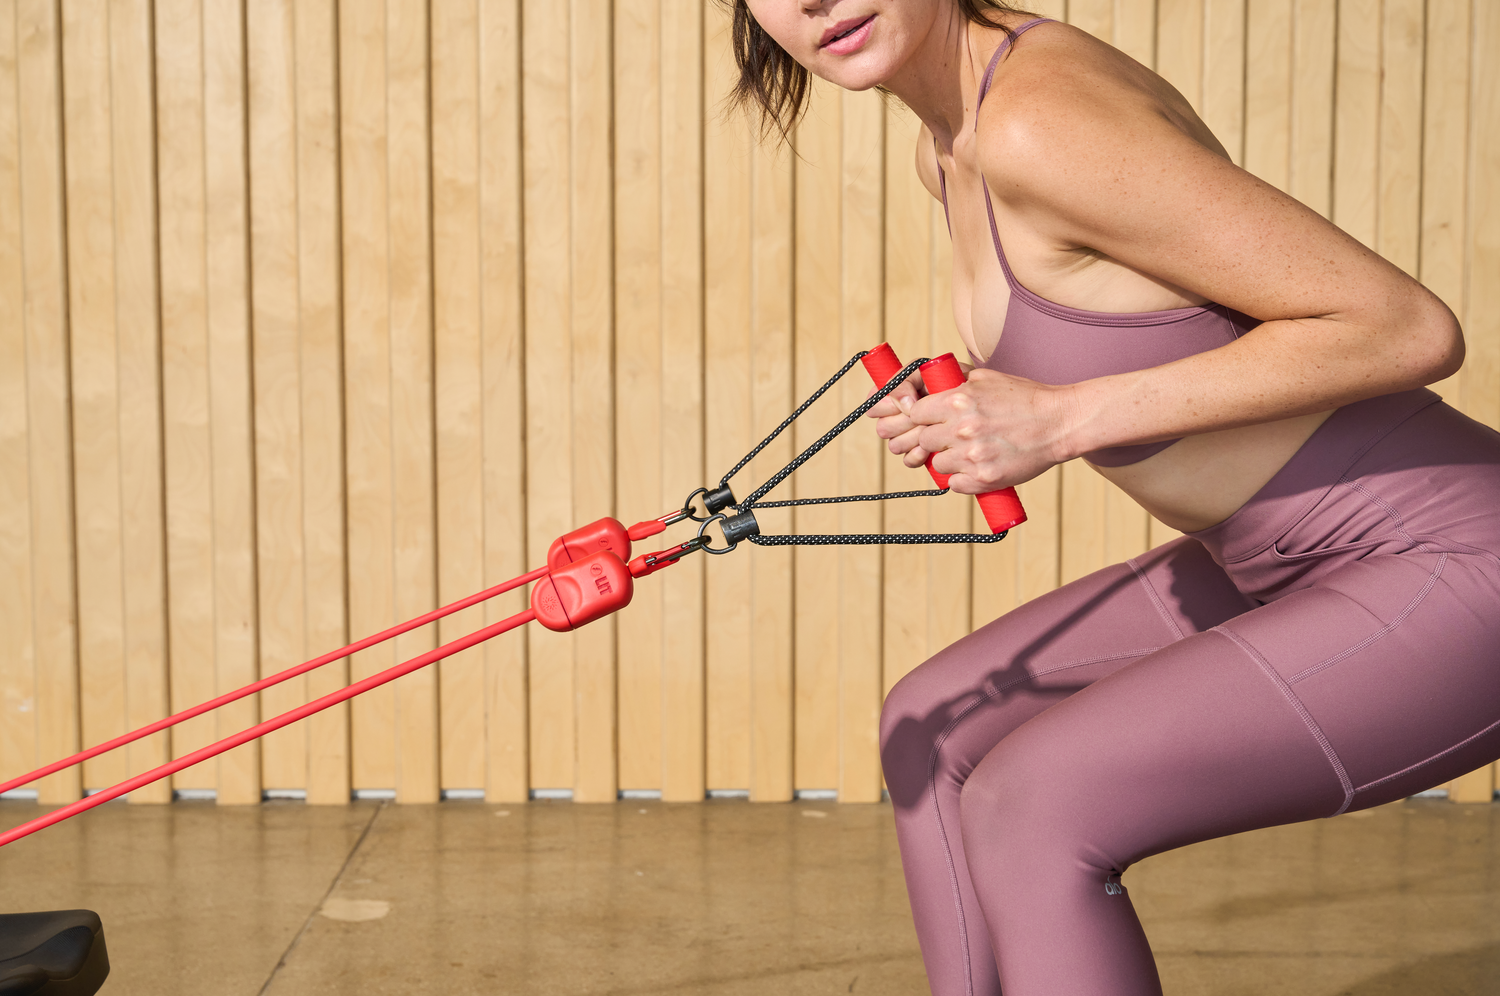 The Resistance Band Back Workout You Can Do Anytime, Anywhere